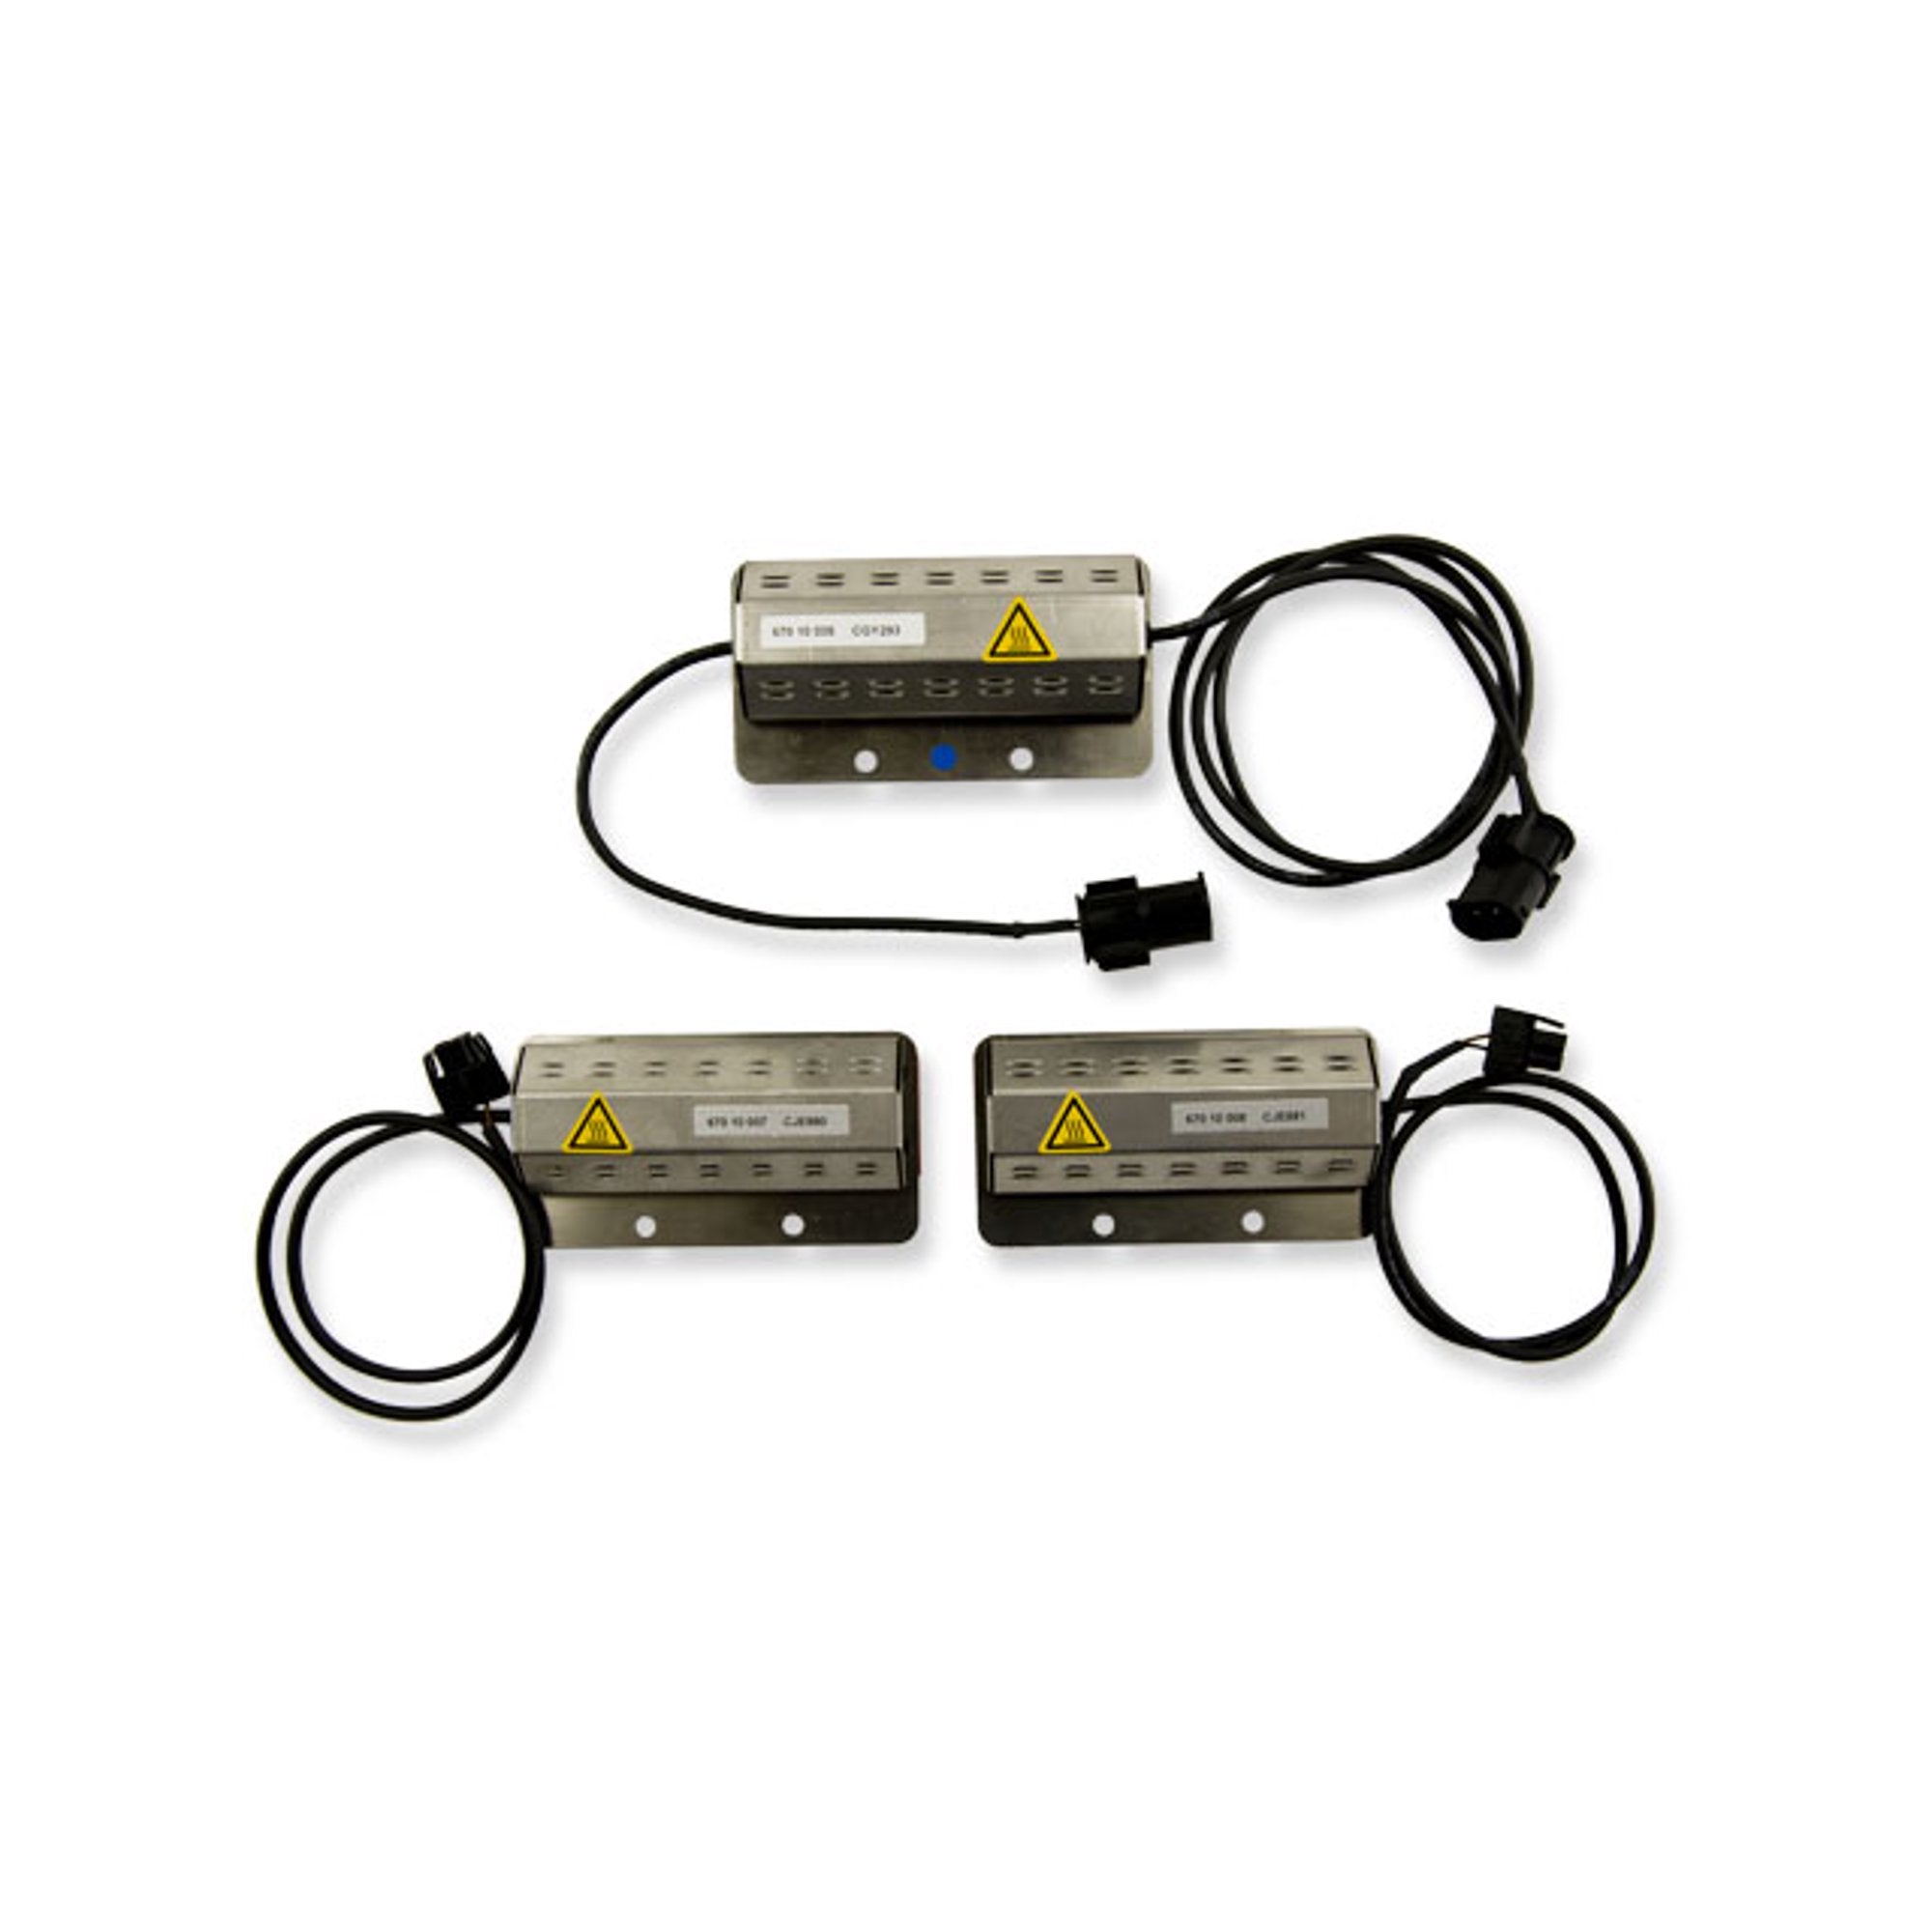 KW Electronic Damping Cancellation Kit Cadillac CTS-V type GMX322